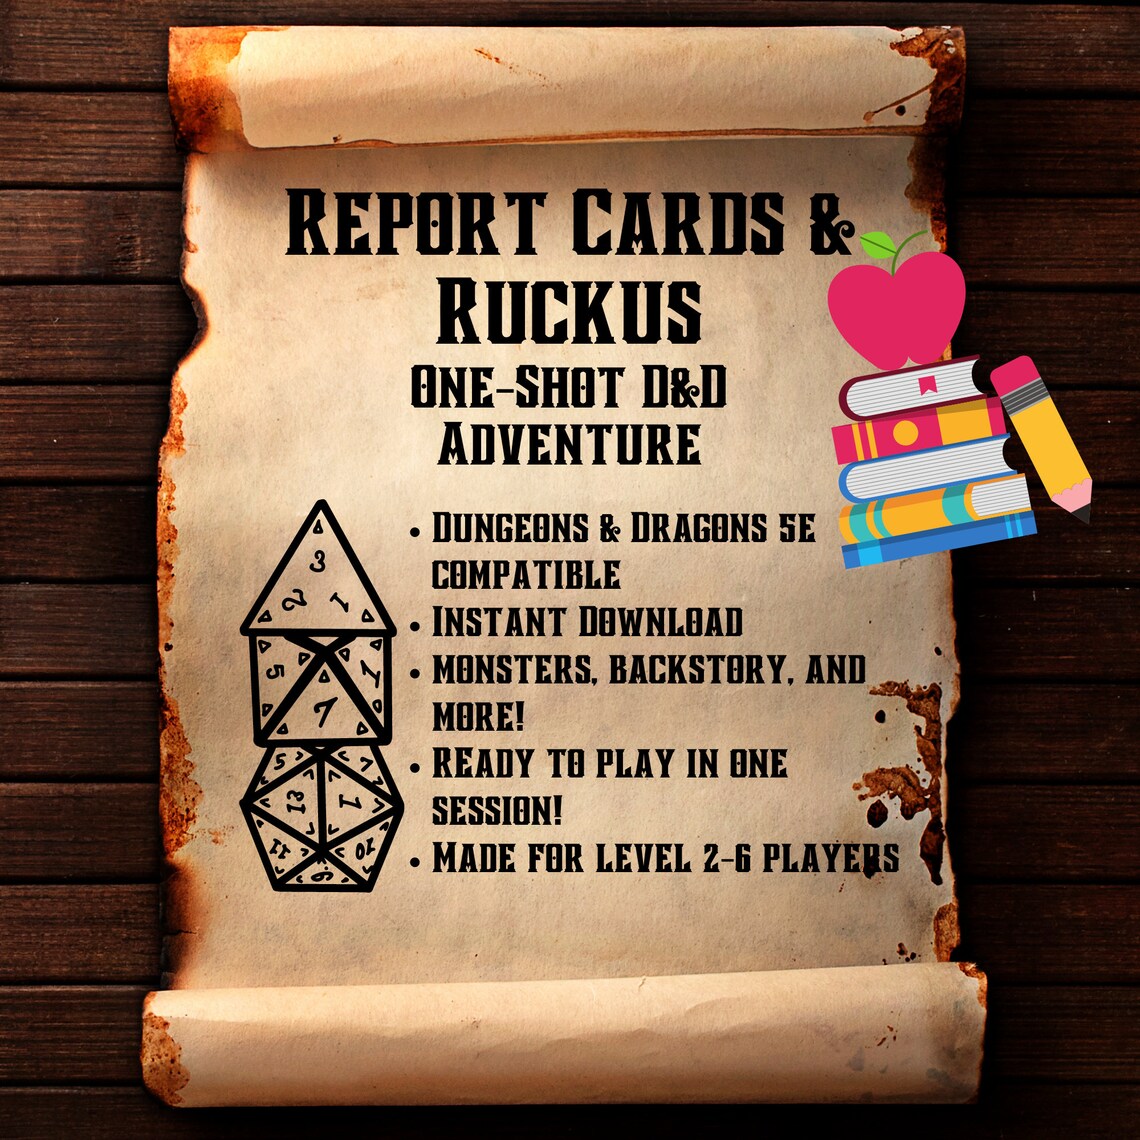 Report Cards & Ruckus - DnD 5E One-Shot Adventure for levels 2-6